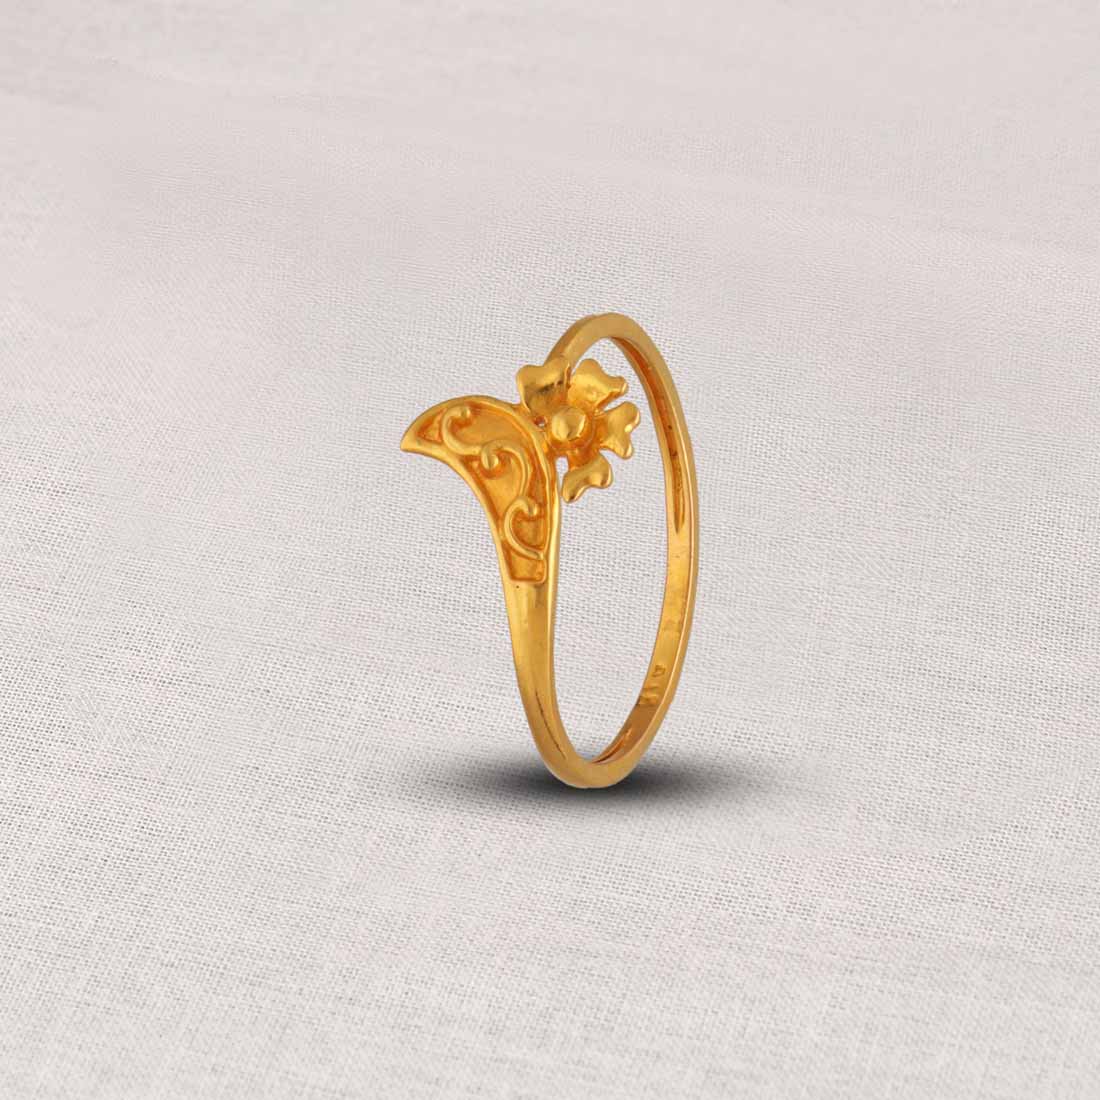 Latest 22k Gold Ring Designs with Weight and Price 2023 #gold || Apsara  Fashions